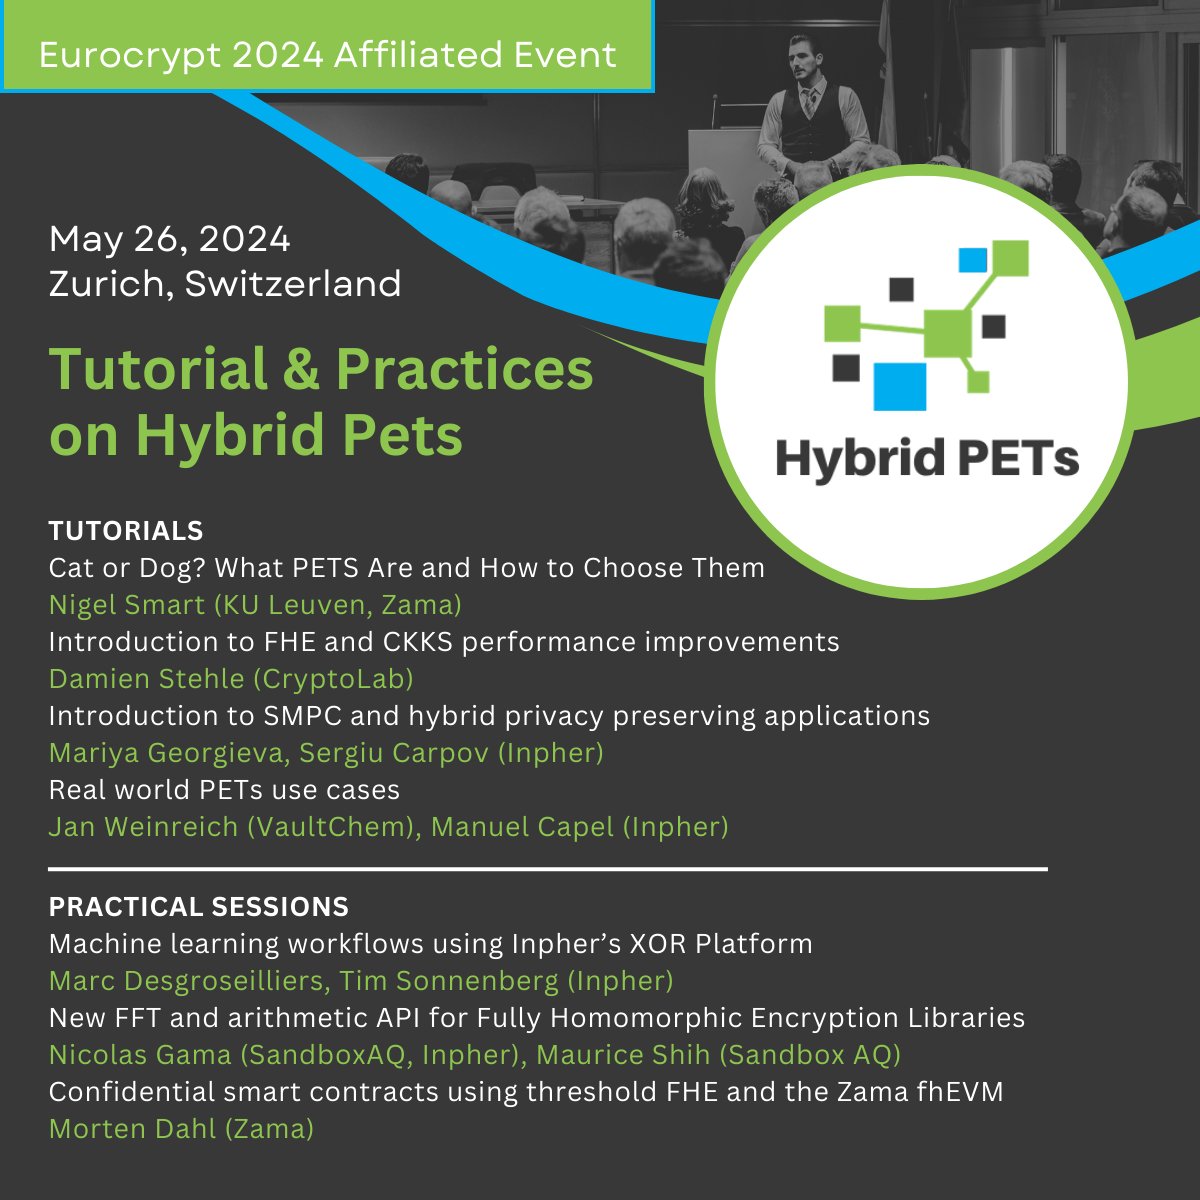 We're only 4 days away from gathering in Zurich for HyPETs! Make sure you attend this Eurocrypt affiliated event focusing on hybrid privacy-preserving workflows and applications, featuring a showcase of various PETs tools and libraries. hubs.li/Q02xZnYR0